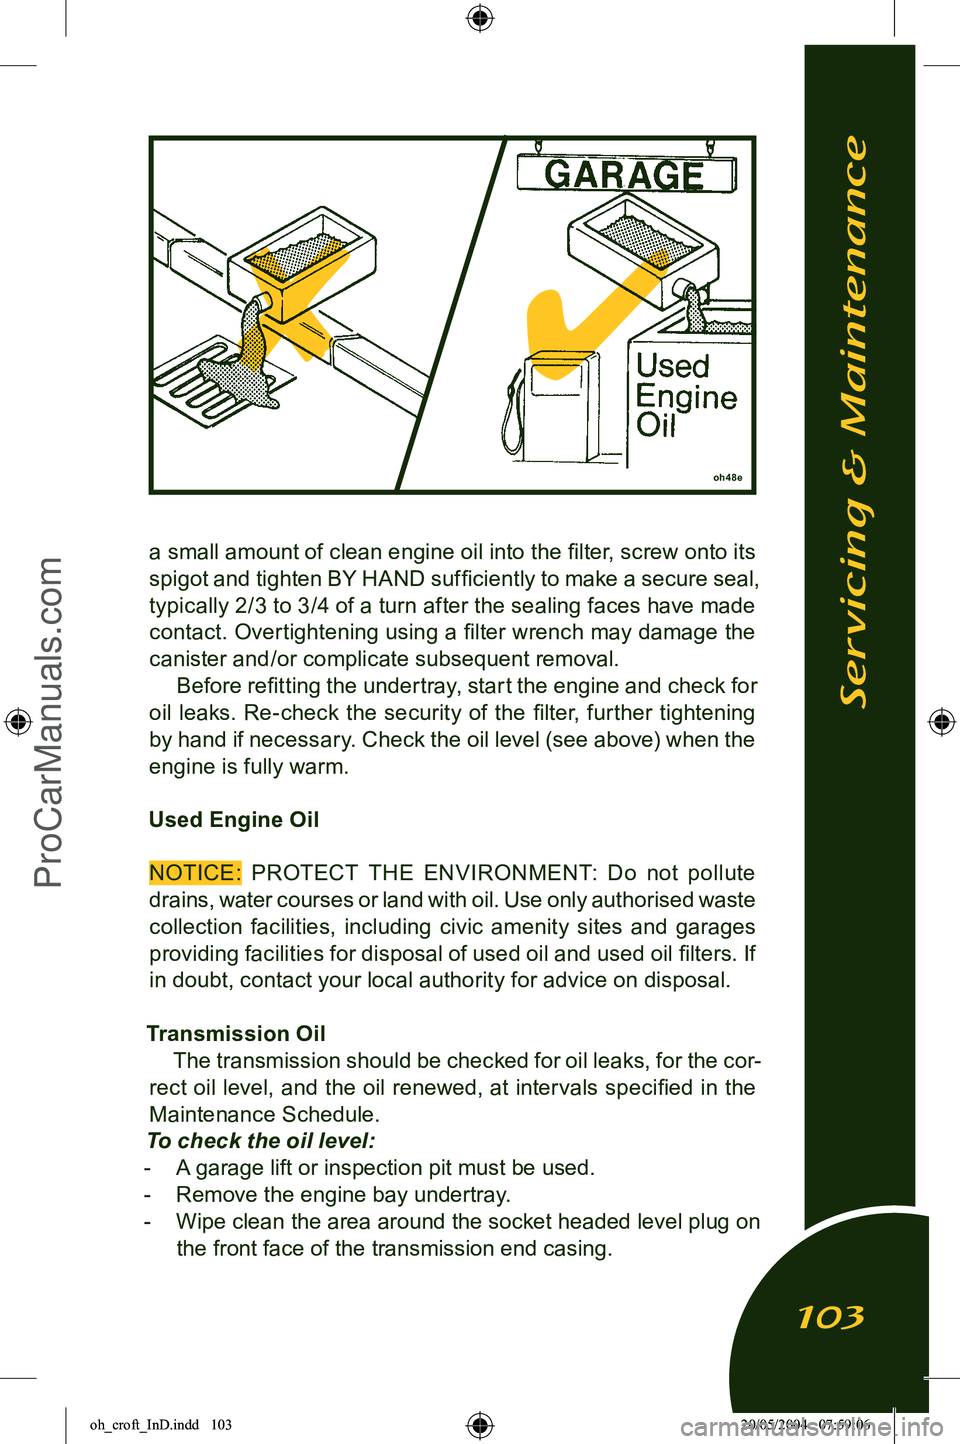 LOTUS ELISE 2005 Owners Guide 
oh48e
a small amount of clean engine oil into the ﬁlter, screw onto its 
spigot and tighten BY HAND sufﬁciently to make a secure seal, 
typically 2/3 to 3/4 of a turn after the sealing faces have